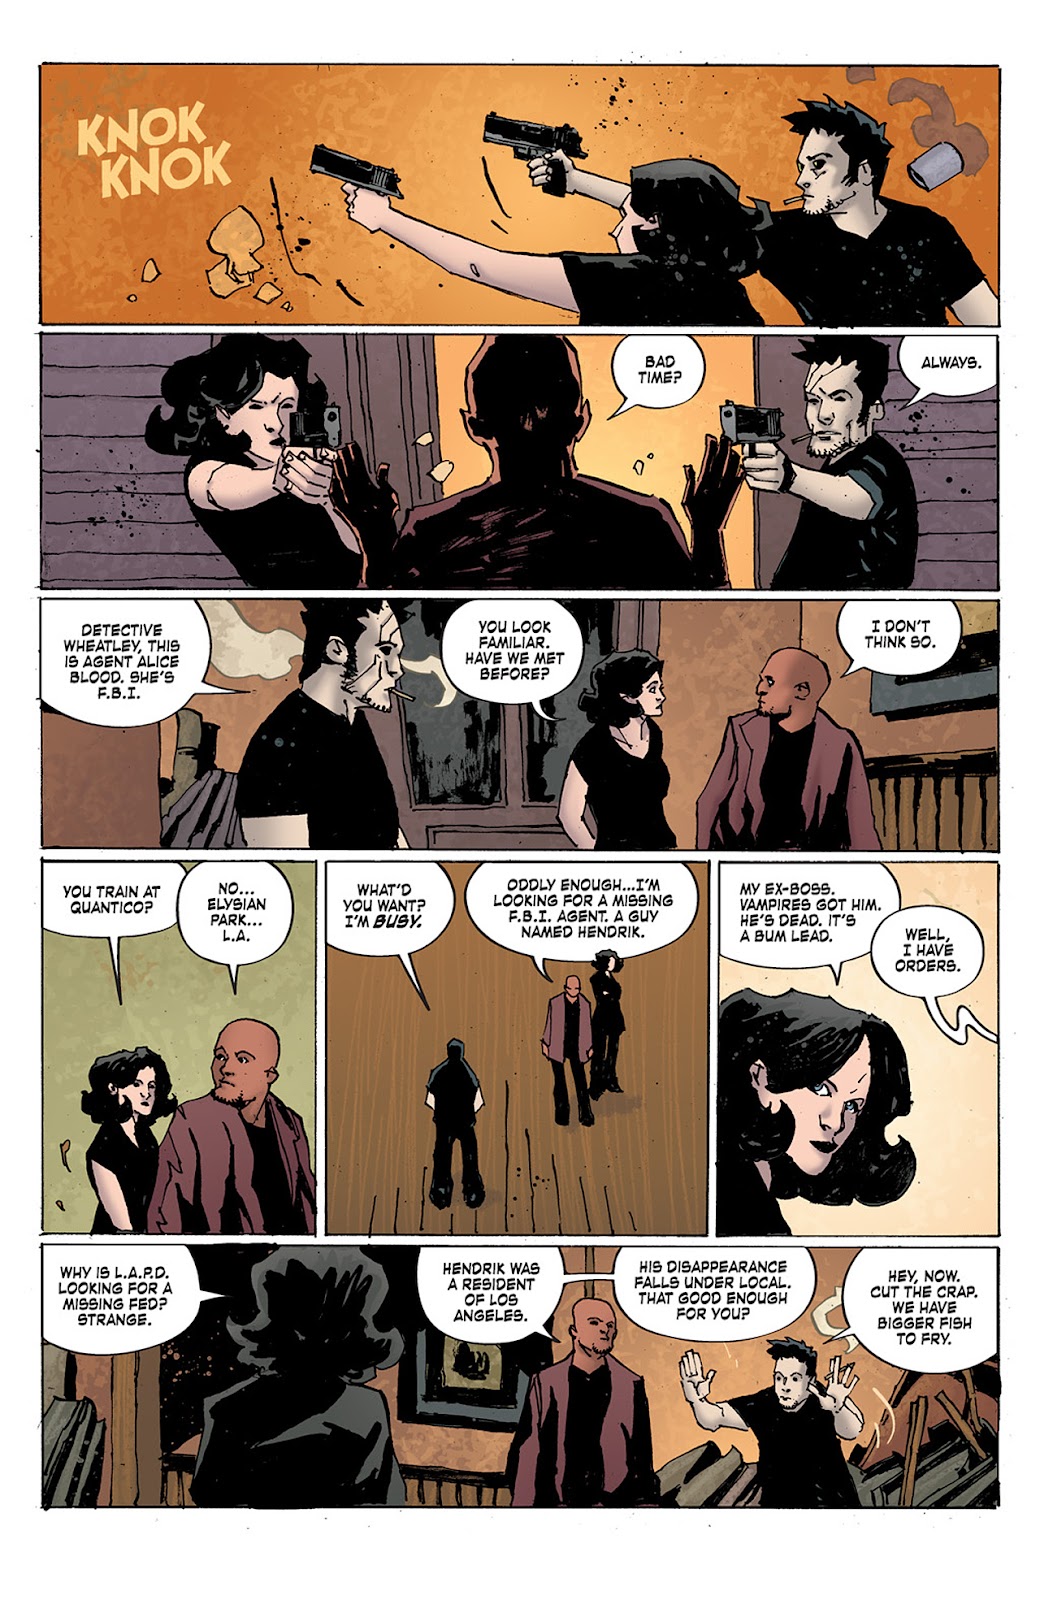 Criminal Macabre: Final Night - The 30 Days of Night Crossover issue 2 - Page 7